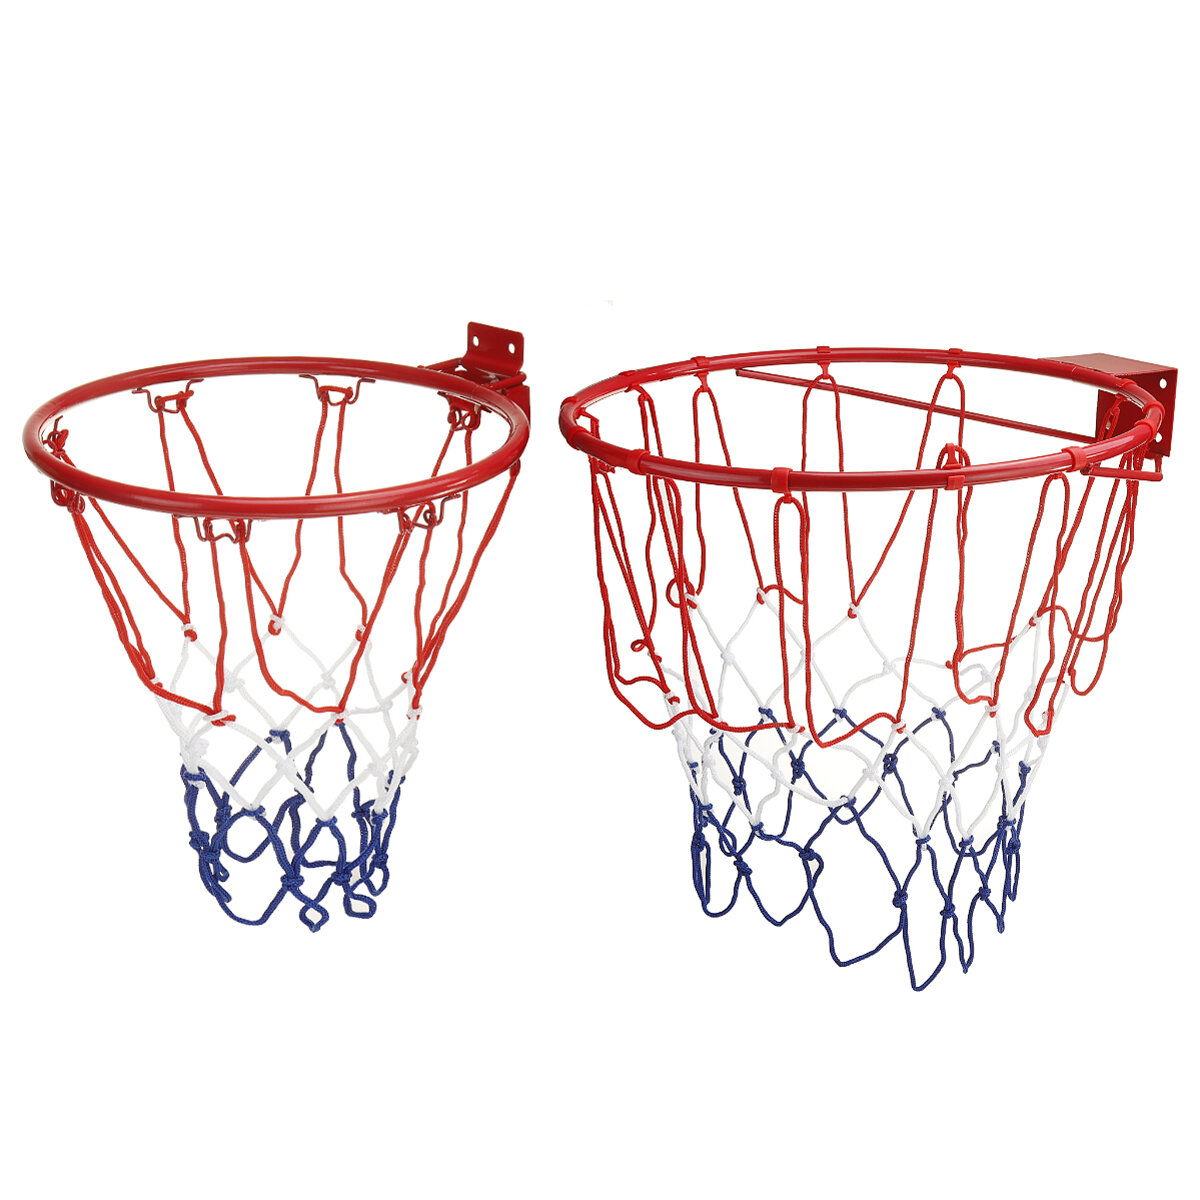 32/45CM Heavy Duty Steel Wall Mounted Basketball Hoop Rim and Net for Indoor Outdoor Sport Basketball Training